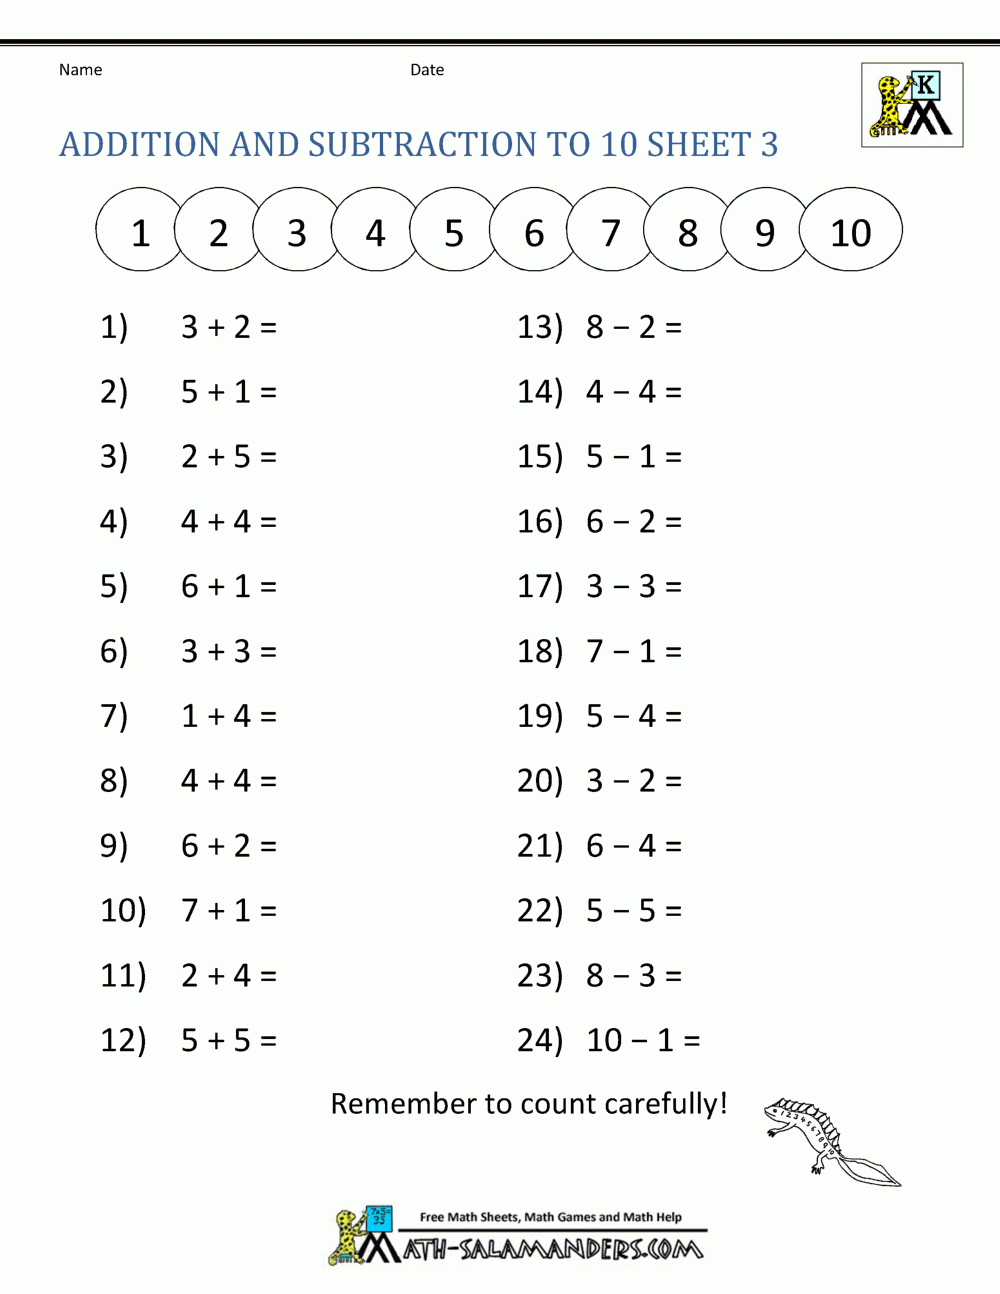 Kindergarten Addition And Subtraction Worksheets pertaining to Free Printable Addition And Subtraction Worksheets